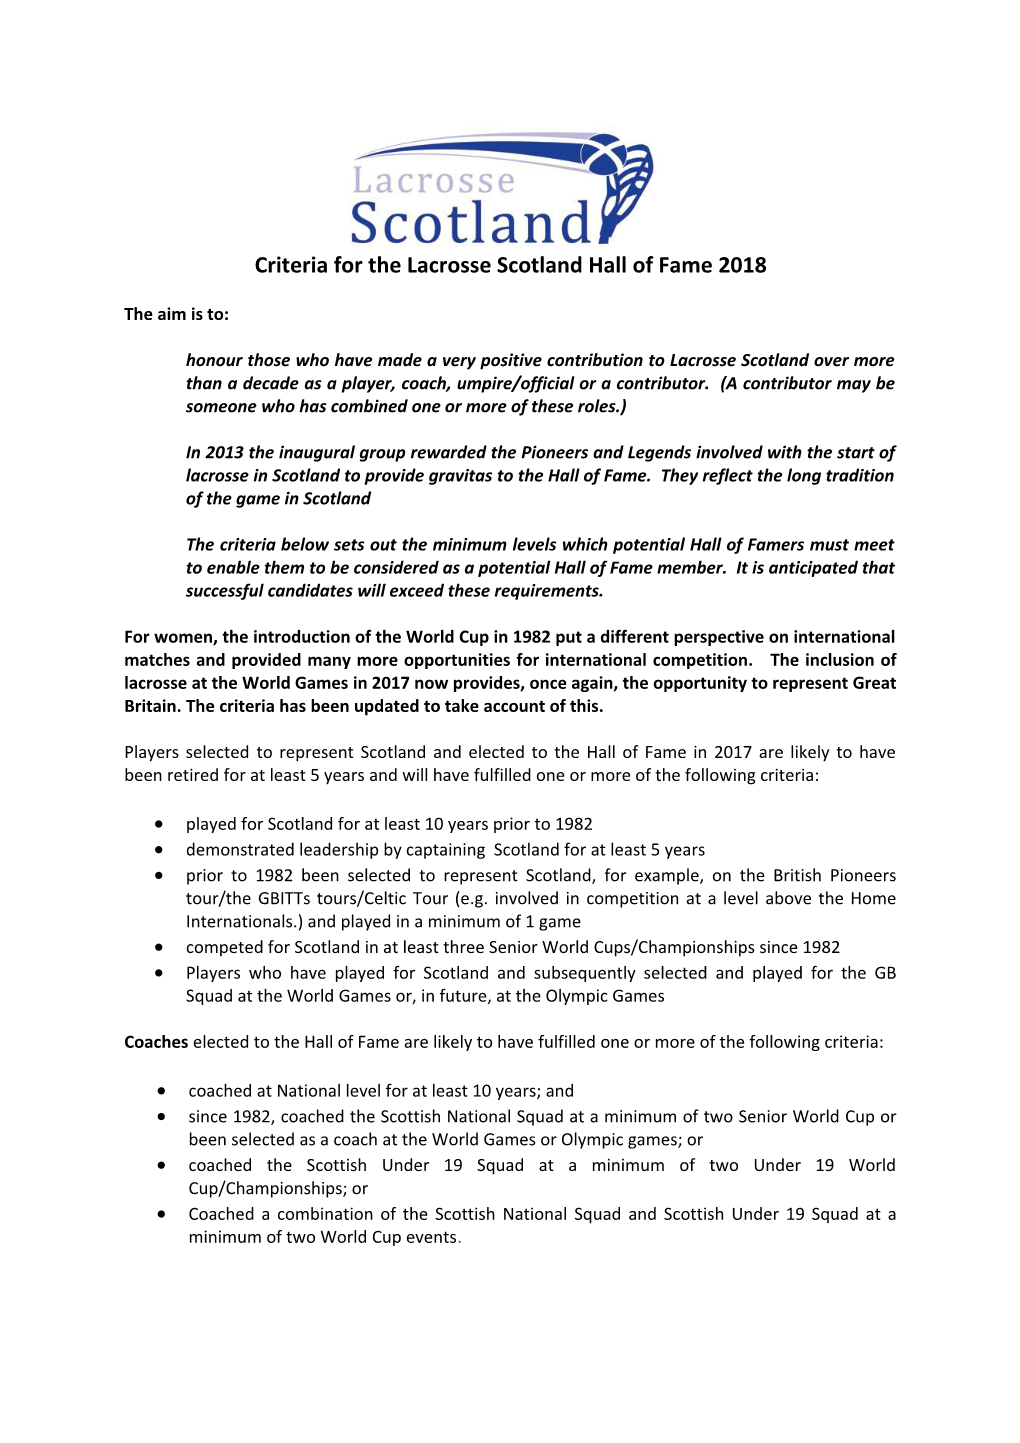 Criteria for the Lacrosse Scotland Hall of Fame 2018